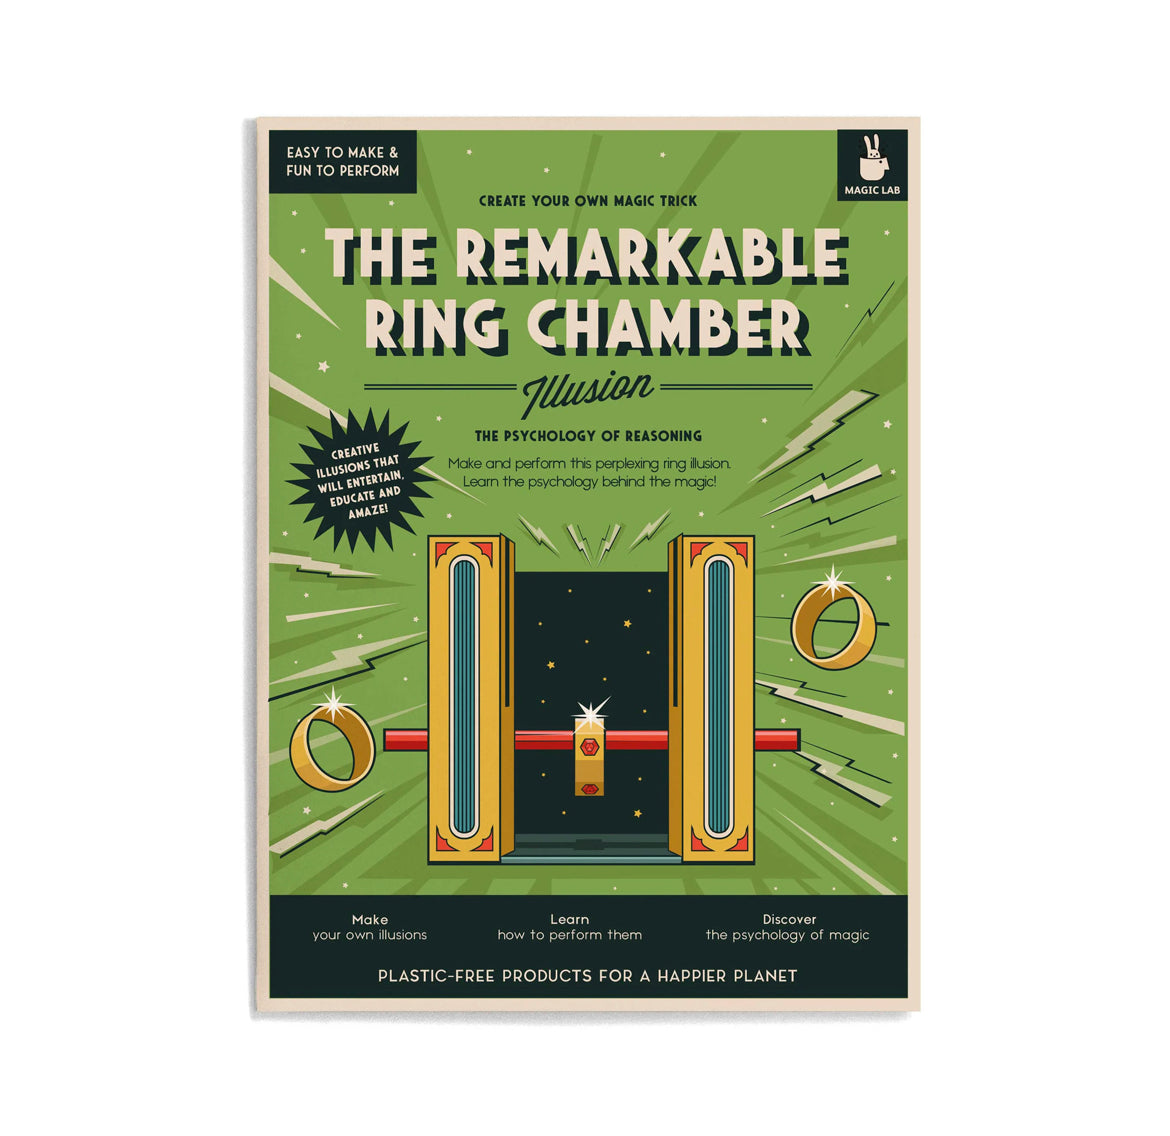 Clockwork Soldier - The Remarkable Ring Chamber Illusion